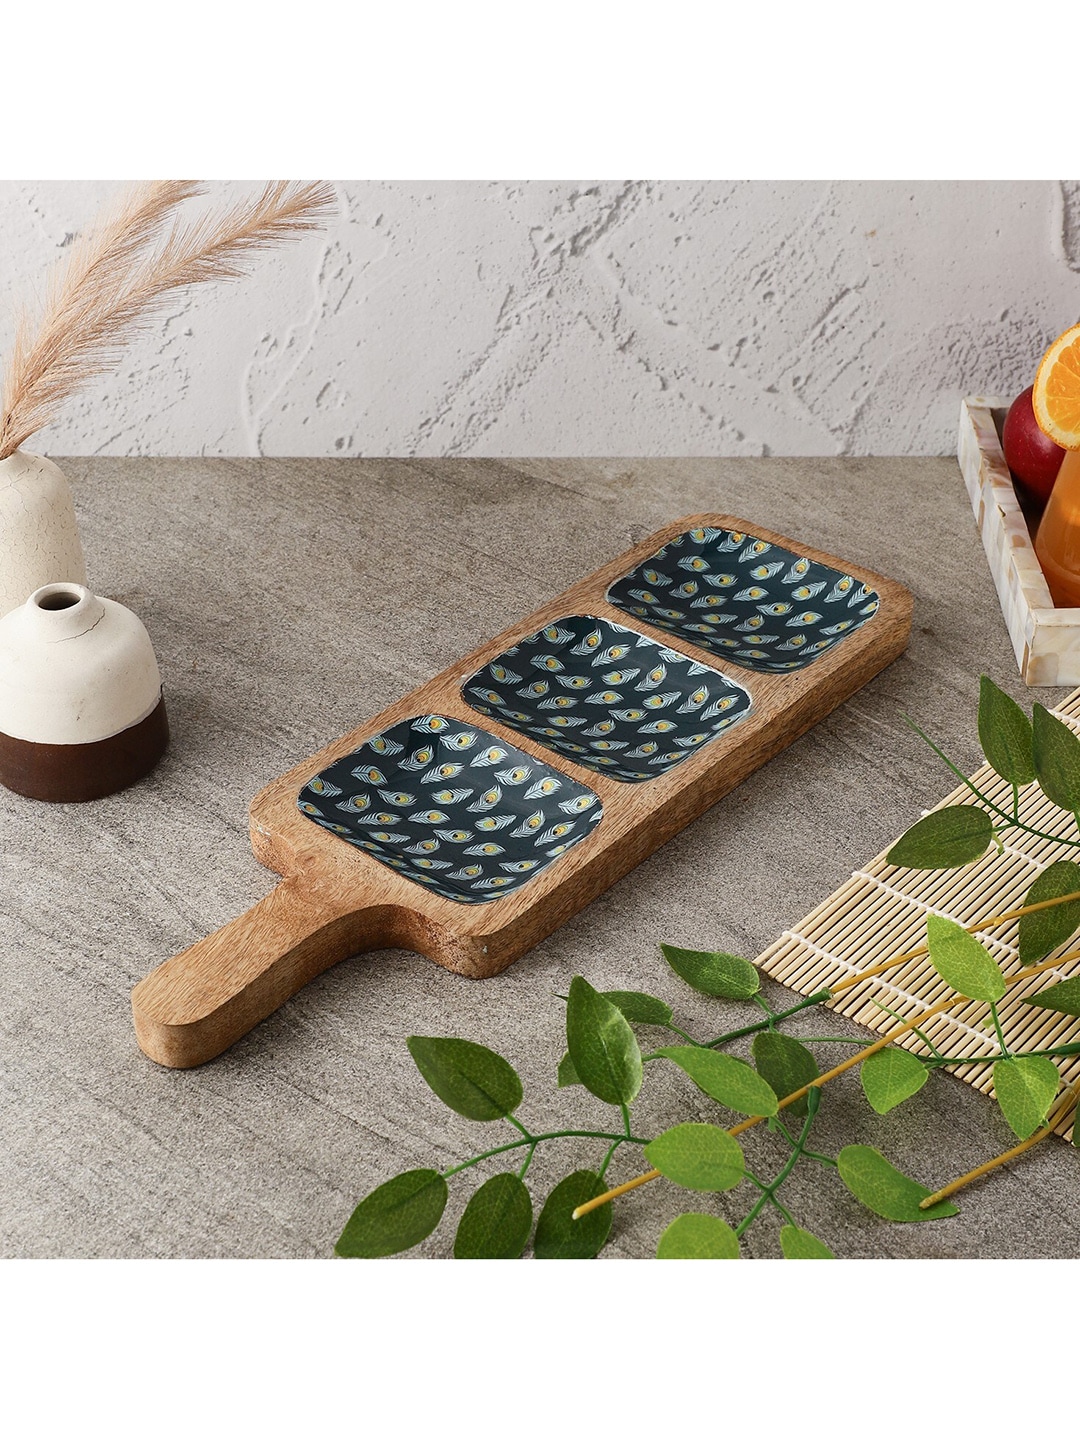 The Decor Mart Teal-Blue & Brown Printed Wooden Serveware Price in India